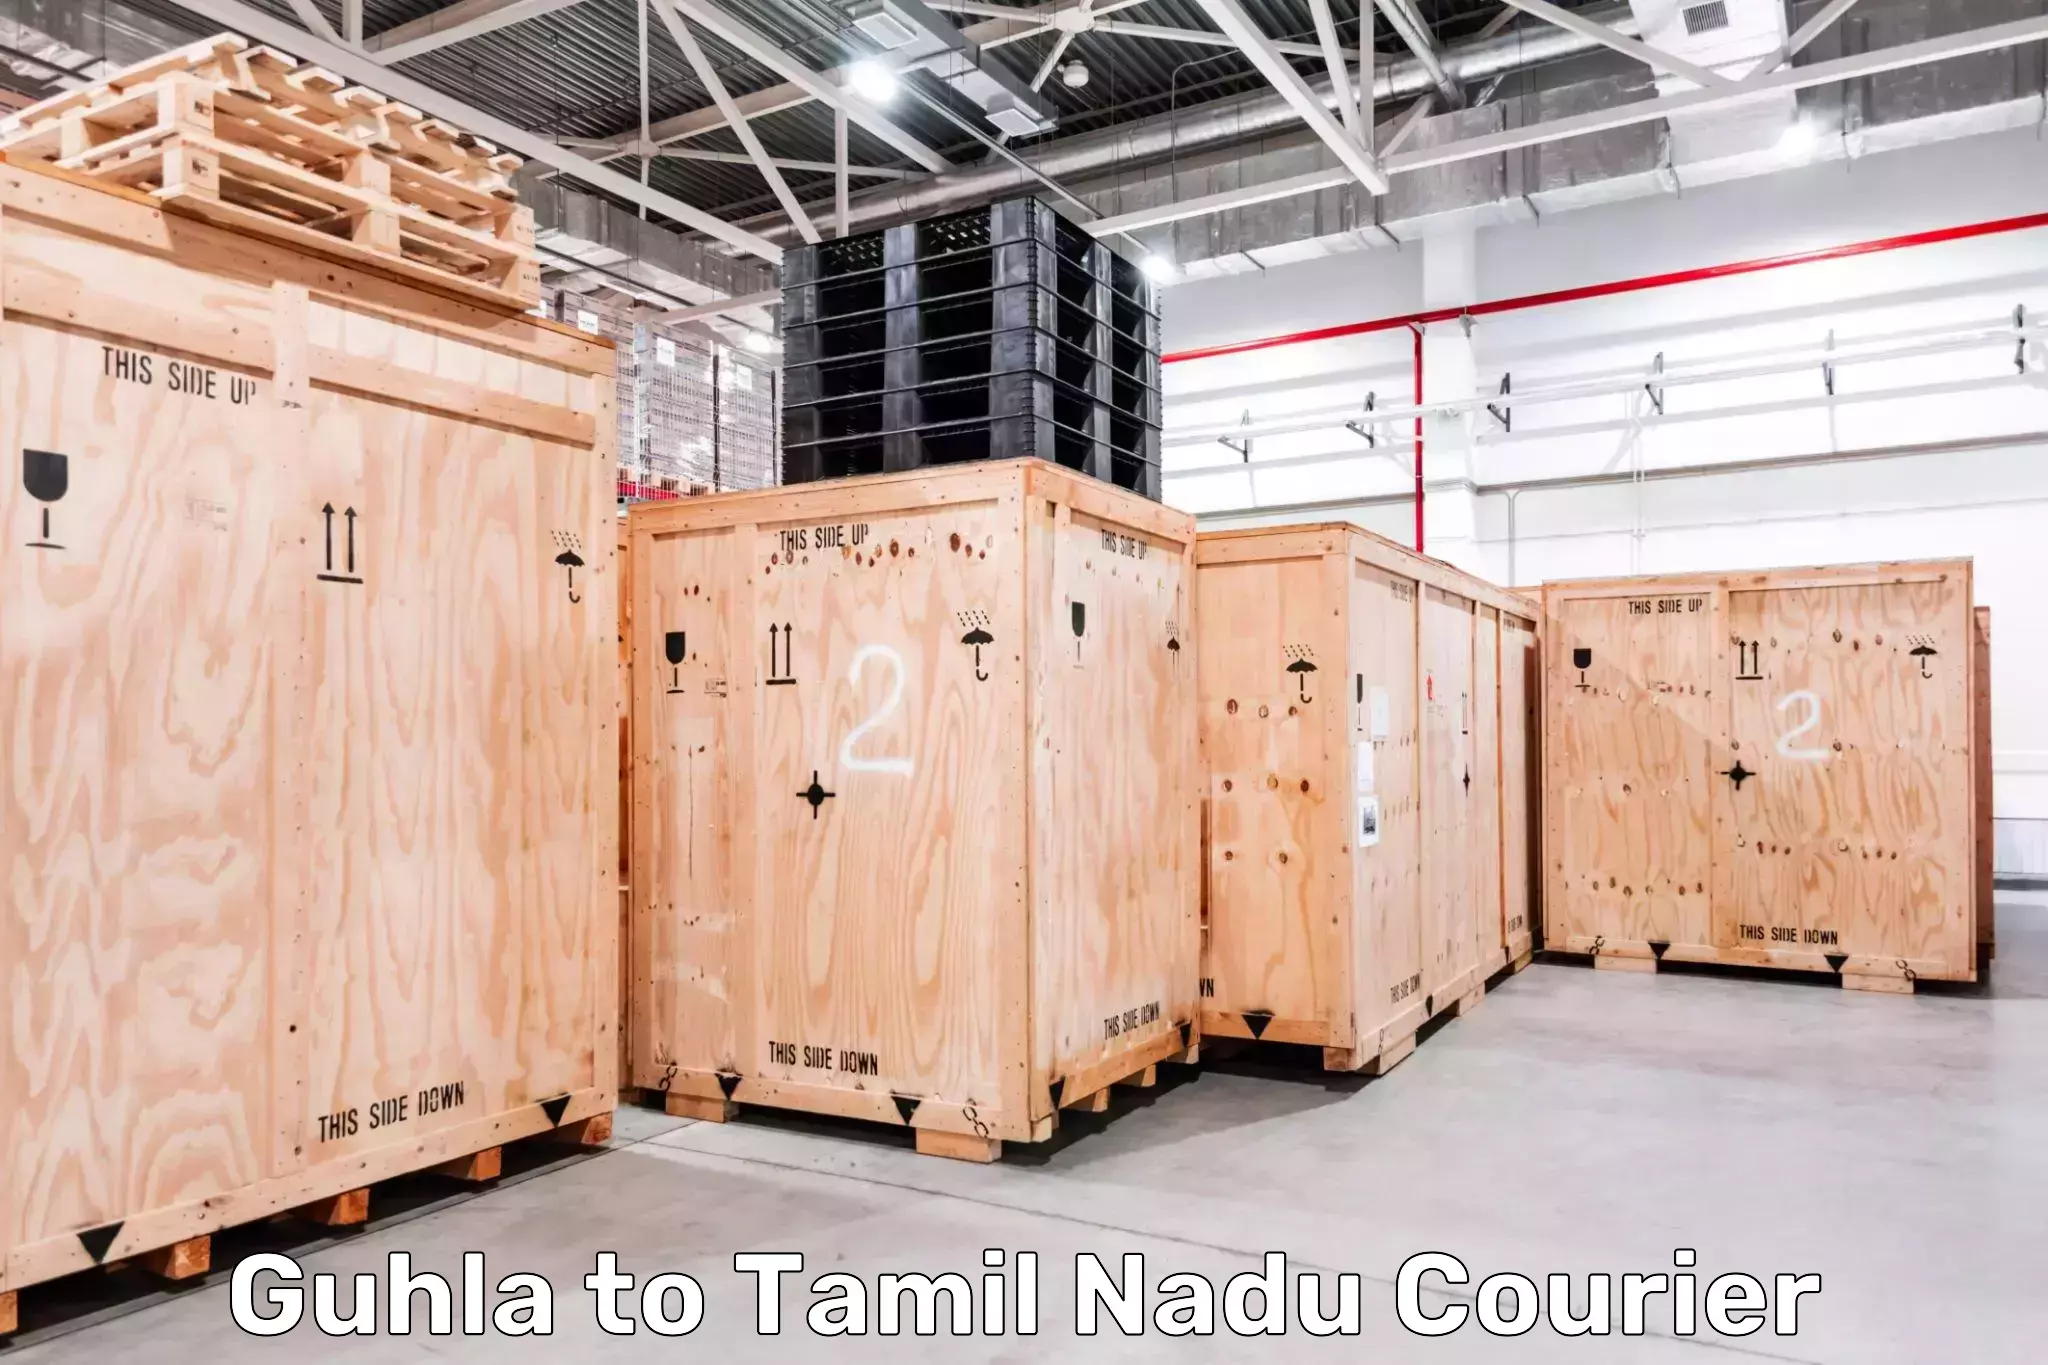 Comprehensive delivery network Guhla to Chennai